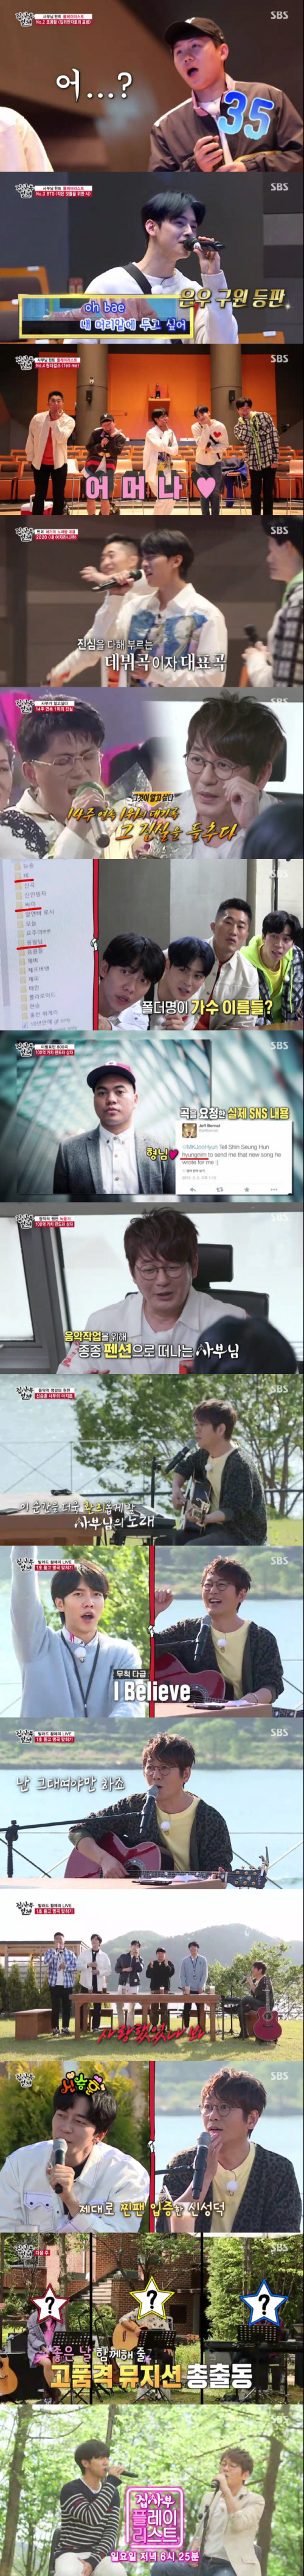 According to Nielsen Korea, a TV viewer rating research institute, SBS All The Butlers, which was broadcast on the 17th, drew a rising curve with 6.1% of household TV viewer ratings, and the 2049 target TV viewer ratings, which are important indicators of the people concerned and lead the topic, were 3.5 percent (based on the second part of the metropolitan area), and the highest TV viewer ratings per minute rose to 7.3% I caught him.Only one of the five ice boxes contains a preparation for the members, the production team told Lee Seung-gi, Yang Se-hyeong, Shin Sung-rok, Jung Eun-woo and Kim Dong-Hyun, who gathered to meet the master, and the masters preparations for the members are included. I gave you a surprise mission.In addition, the production team said that they selected songs related to the master, and Shin Sung-rok, Yang Se-hyeong, Kim Dong-Hyun and Jung Eun-woo raised the atmosphere by singing Seo Taiji and the childrens I know, Cho Yong-pils Chilimanjaros leopard and BTSs Poetry for Small Things.On the other hand, Lee Seung-gi captivated the ears of those who watched his debut song My Girl in a unique appealing voice for the confrontation with Yang Se-hyeong who had a team dinner.The production team said, The songs that have been sung so far are the longest songs in the history of Korean popular songs.Todays master was listed in the Guinness Book of Records for 14 weeks, he said, Seven consecutive albums that are hard to see in the World , and Lee Seung-gi and Shin Sung-rok seemed to have noticed the master.The master of the day, which I met in the recording studio, was the legendary ballad emperor Shin Seung Hun, who expressed his gratitude, saying, I told you that I wanted to take you from last year.Shin Seung Hun then performed the song Invisible Love, which was ranked # 1 for 14 consecutive weeks, with an impromptu piano performance and Love Live!The members of Shin Seung Huns impromptu Love Live! were very enthusiastic, and Shin Seung Hun said, Is this enough?There are many other hits, and it will be fun today.On the other hand, Shin Seung Hun said, I wrote it myself, but it does not fit me.I saved a singer who seemed to fit more with a folder name. From Jeff Bridges Burnett to World Star Rain and Psy, and Cho Yong-pil, I opened up the composition folders stored in the name of the amazing Lee Su-hyun.In fact, Shin Seung Hun surprised the members by knowing that he wrote a song by World R & B Lee Su-hyun Jeff Bridges Burnett.Shin Seung Hun later guided the members to his azit, saying, When I write a song, I leave for the pension. If I have a thrill in a new place, the song will come out well.There, in the background of beautiful natural scenery, Shin Seung Hun gave healing by singing for the five members.Then, the game of Listening for 1 Second and Hitting Shin Seung Huns famous song was played.The members continued to answer the correct answer, and Shin Seung Hun gave a time to charge the emotions by singing memorable songs with a sweet voice.The members also sang Shin Seung Huns famous songs together and filled the Camp.Meanwhile, at the end of the broadcast, a healing concert with high-quality Lee Su-hyun was released, raising expectations for next weeks broadcast.Photos  SBS